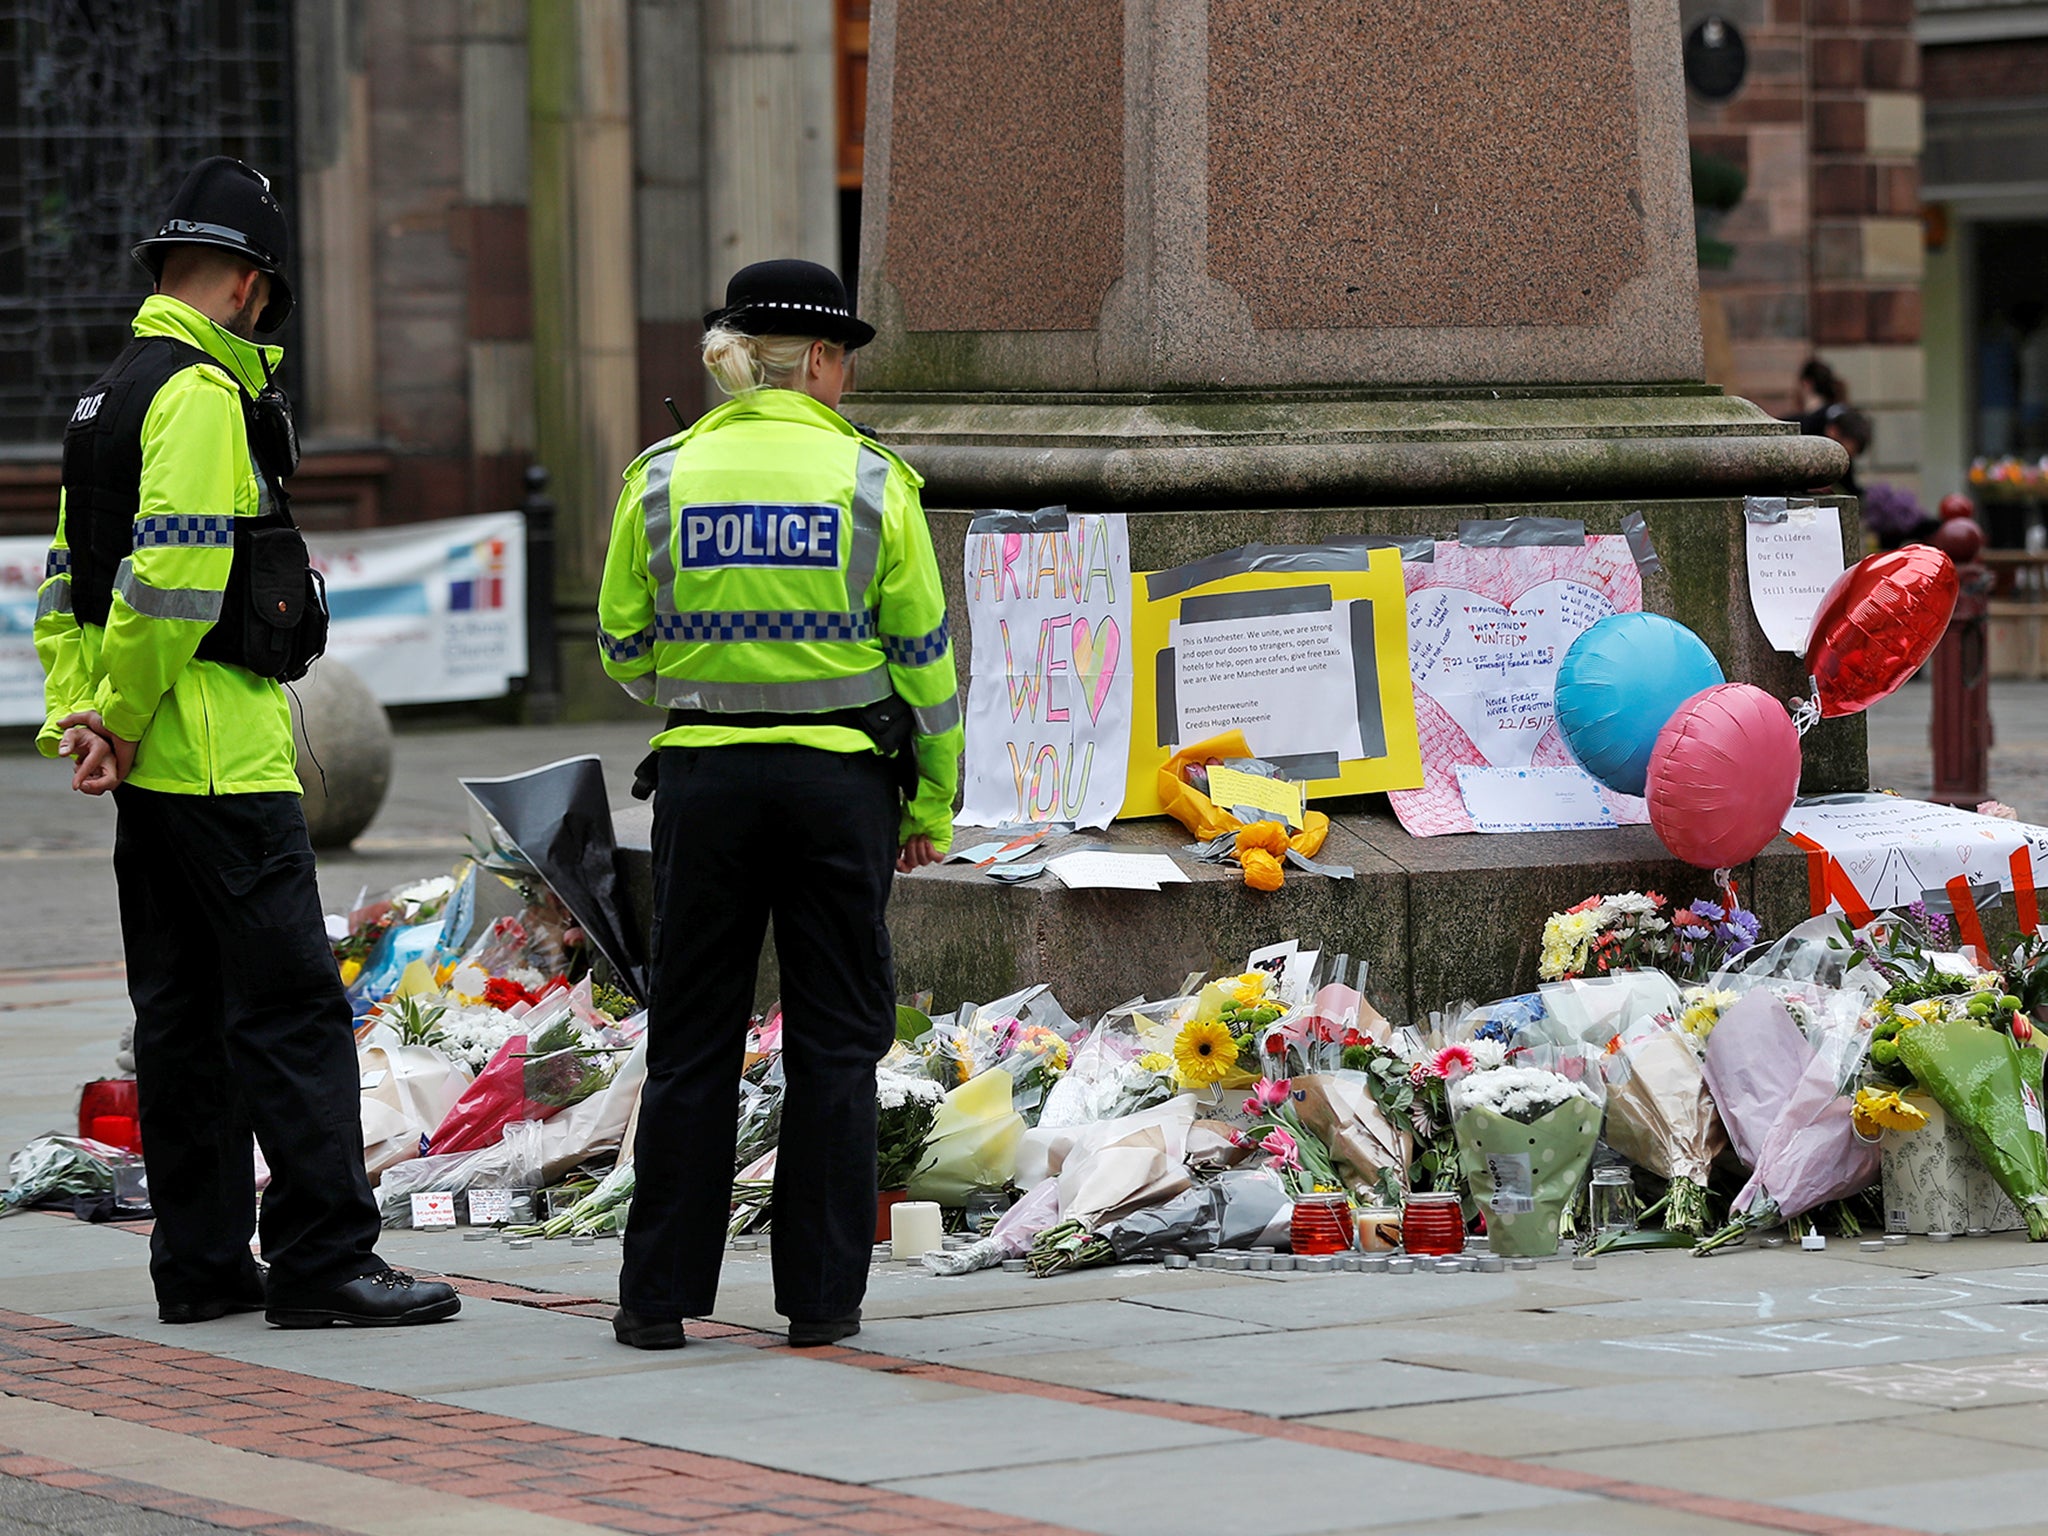 Floral tributes left in central Manchester for victims of the attack